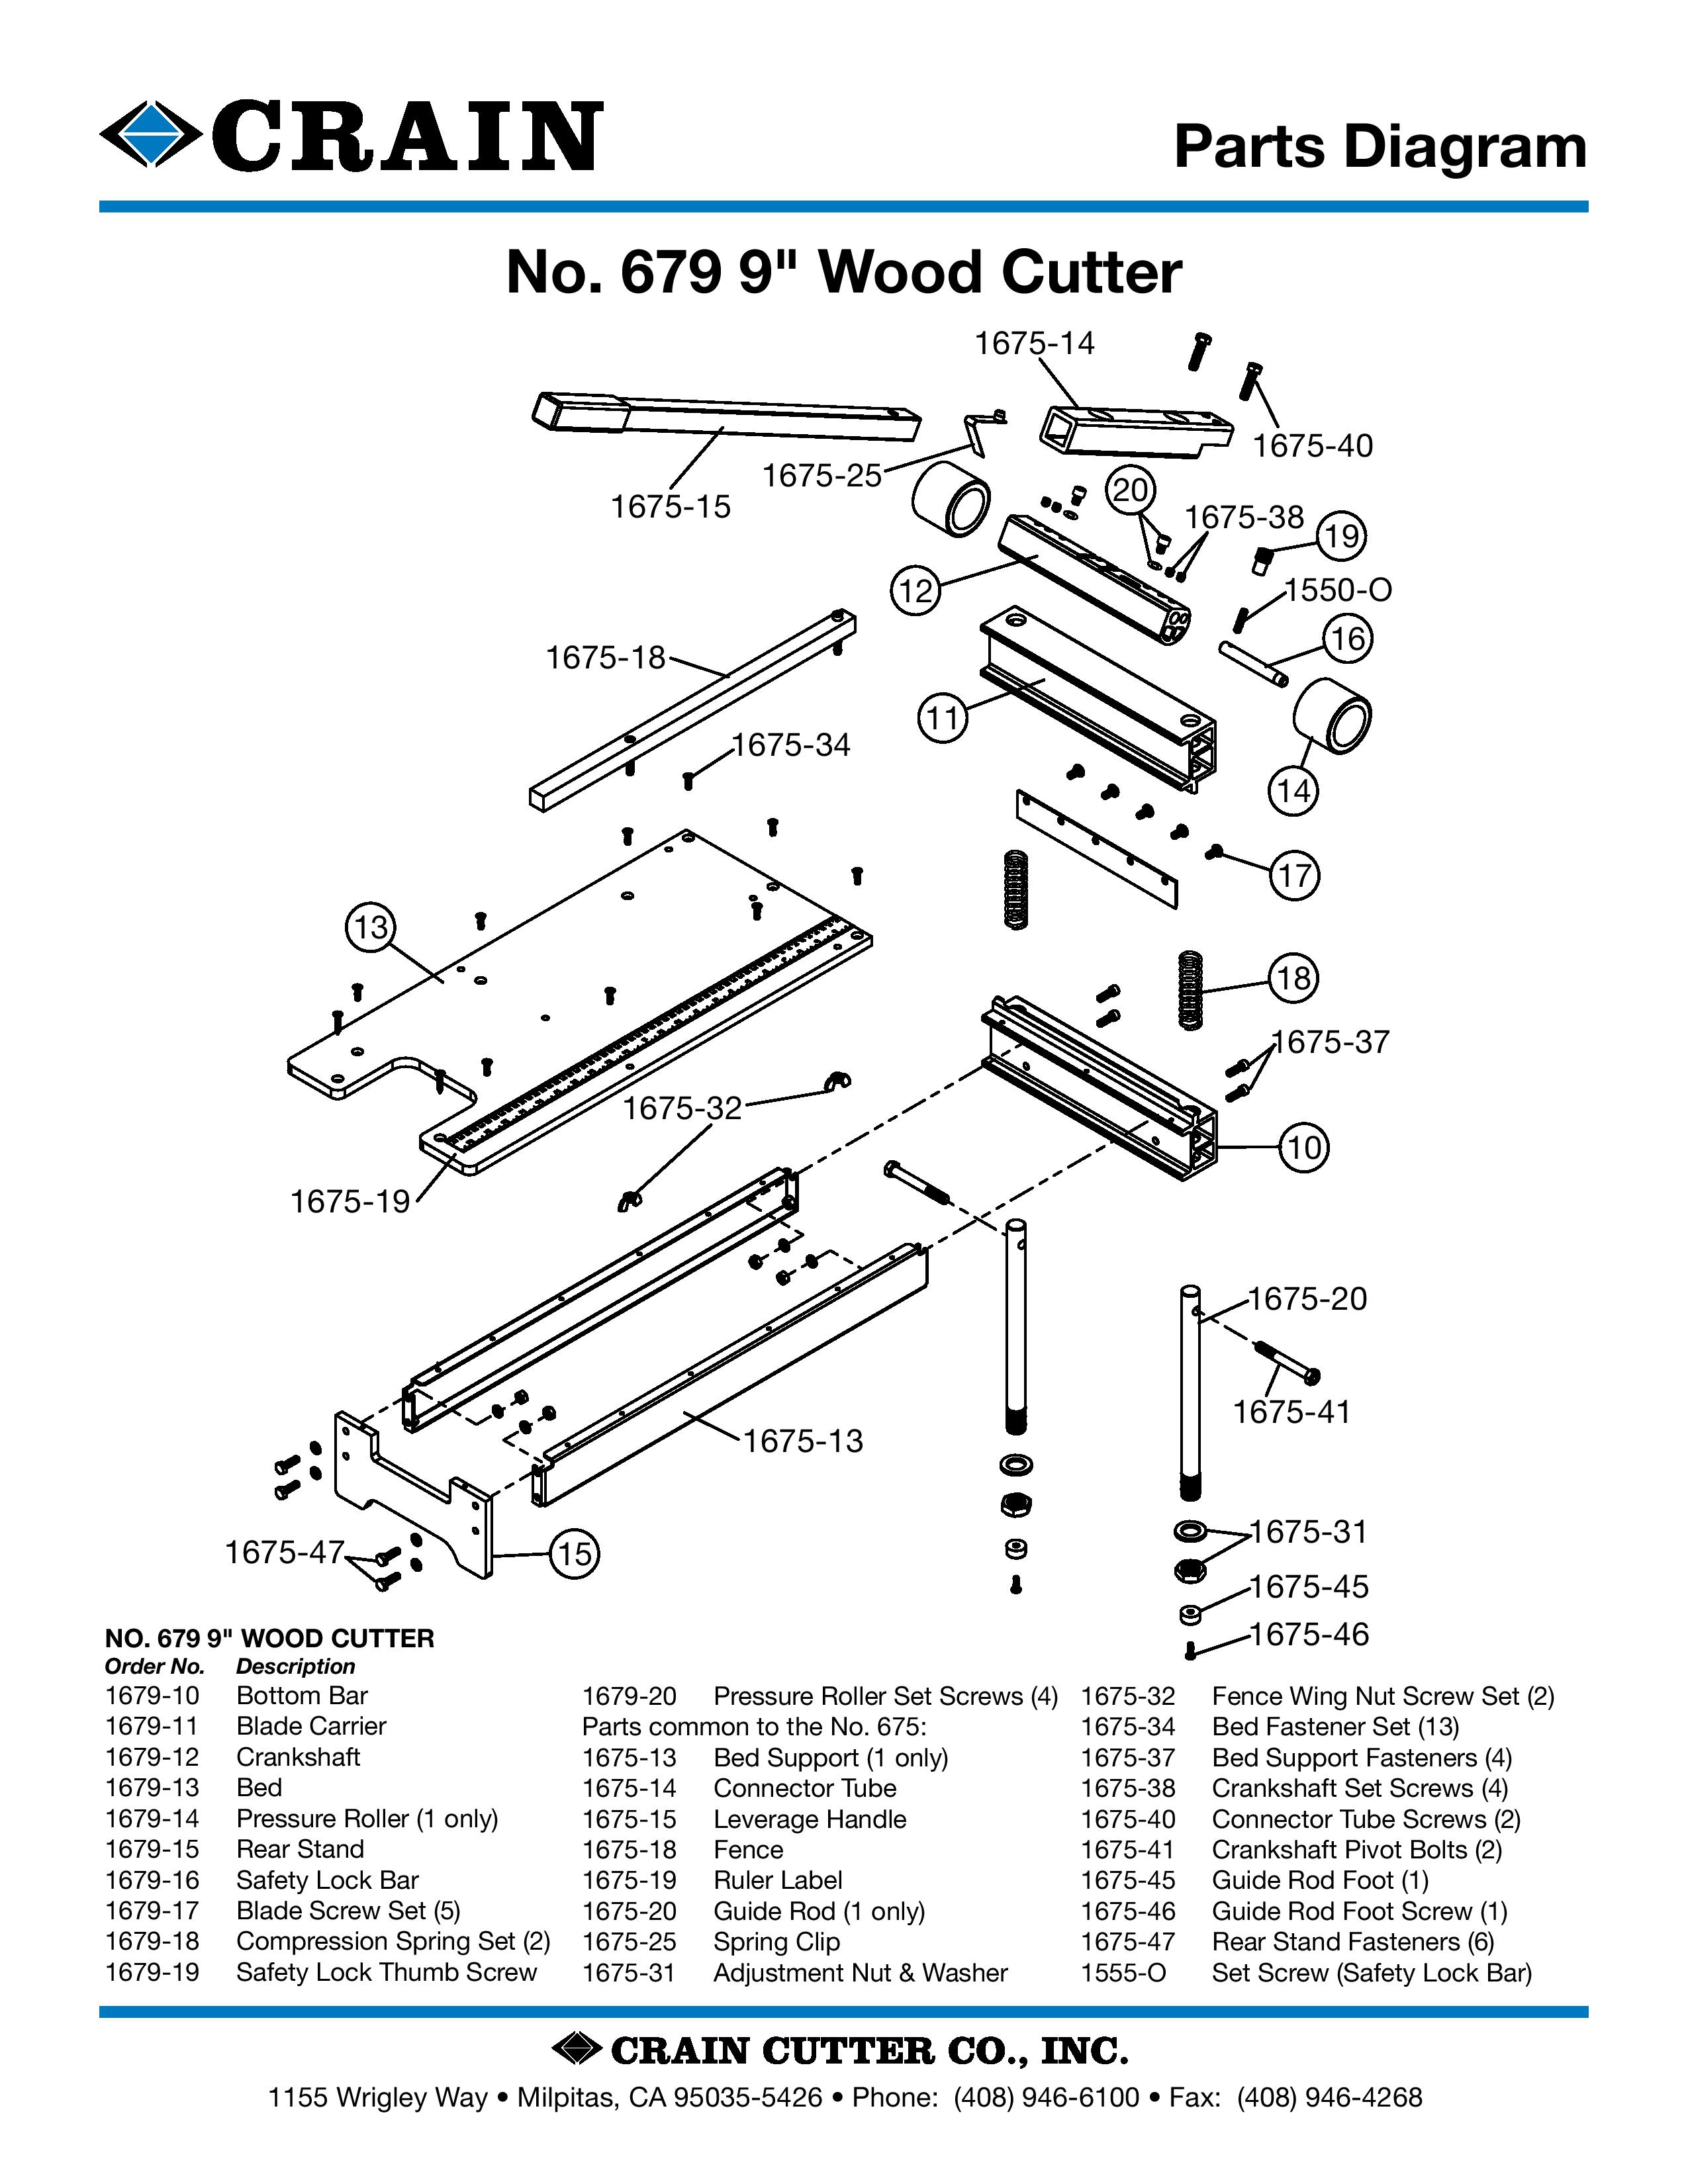 CRAIN 679 9 Wood Cutter - Current Model : Flooring Tools & Installation  Supplies | jnsflooringandsupplies.com, The Only Thing Better Than Our  Selection Is Our Service